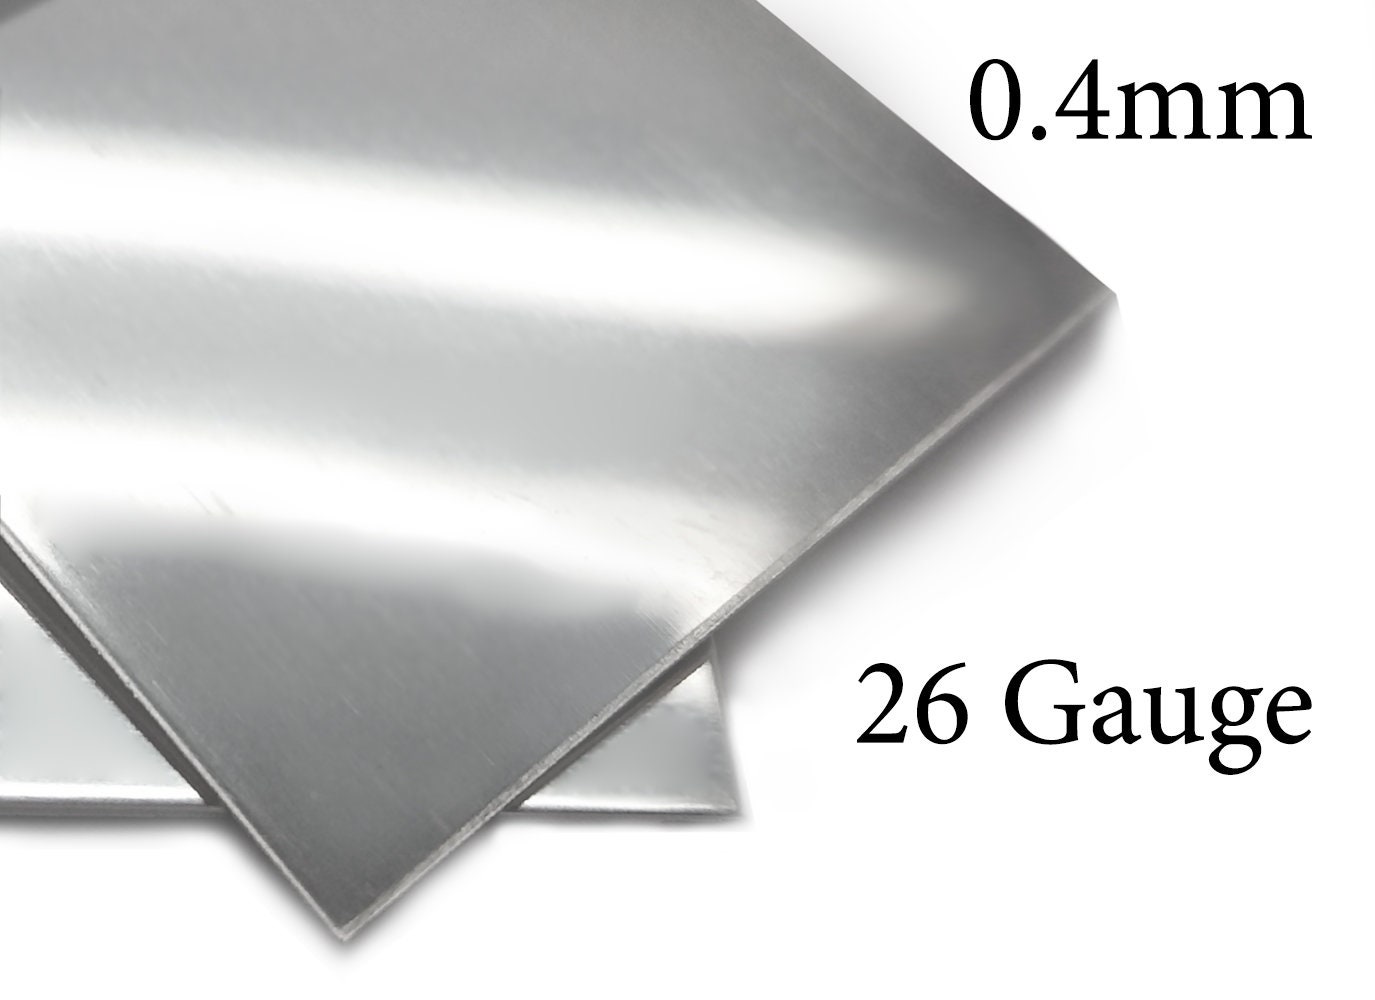 26 Gauge 6x1 925 Sterling Silver Sheet Stamping Blank Dead Soft Made in  USA by CRAFT WIRE 26 Gauge 6 X 1